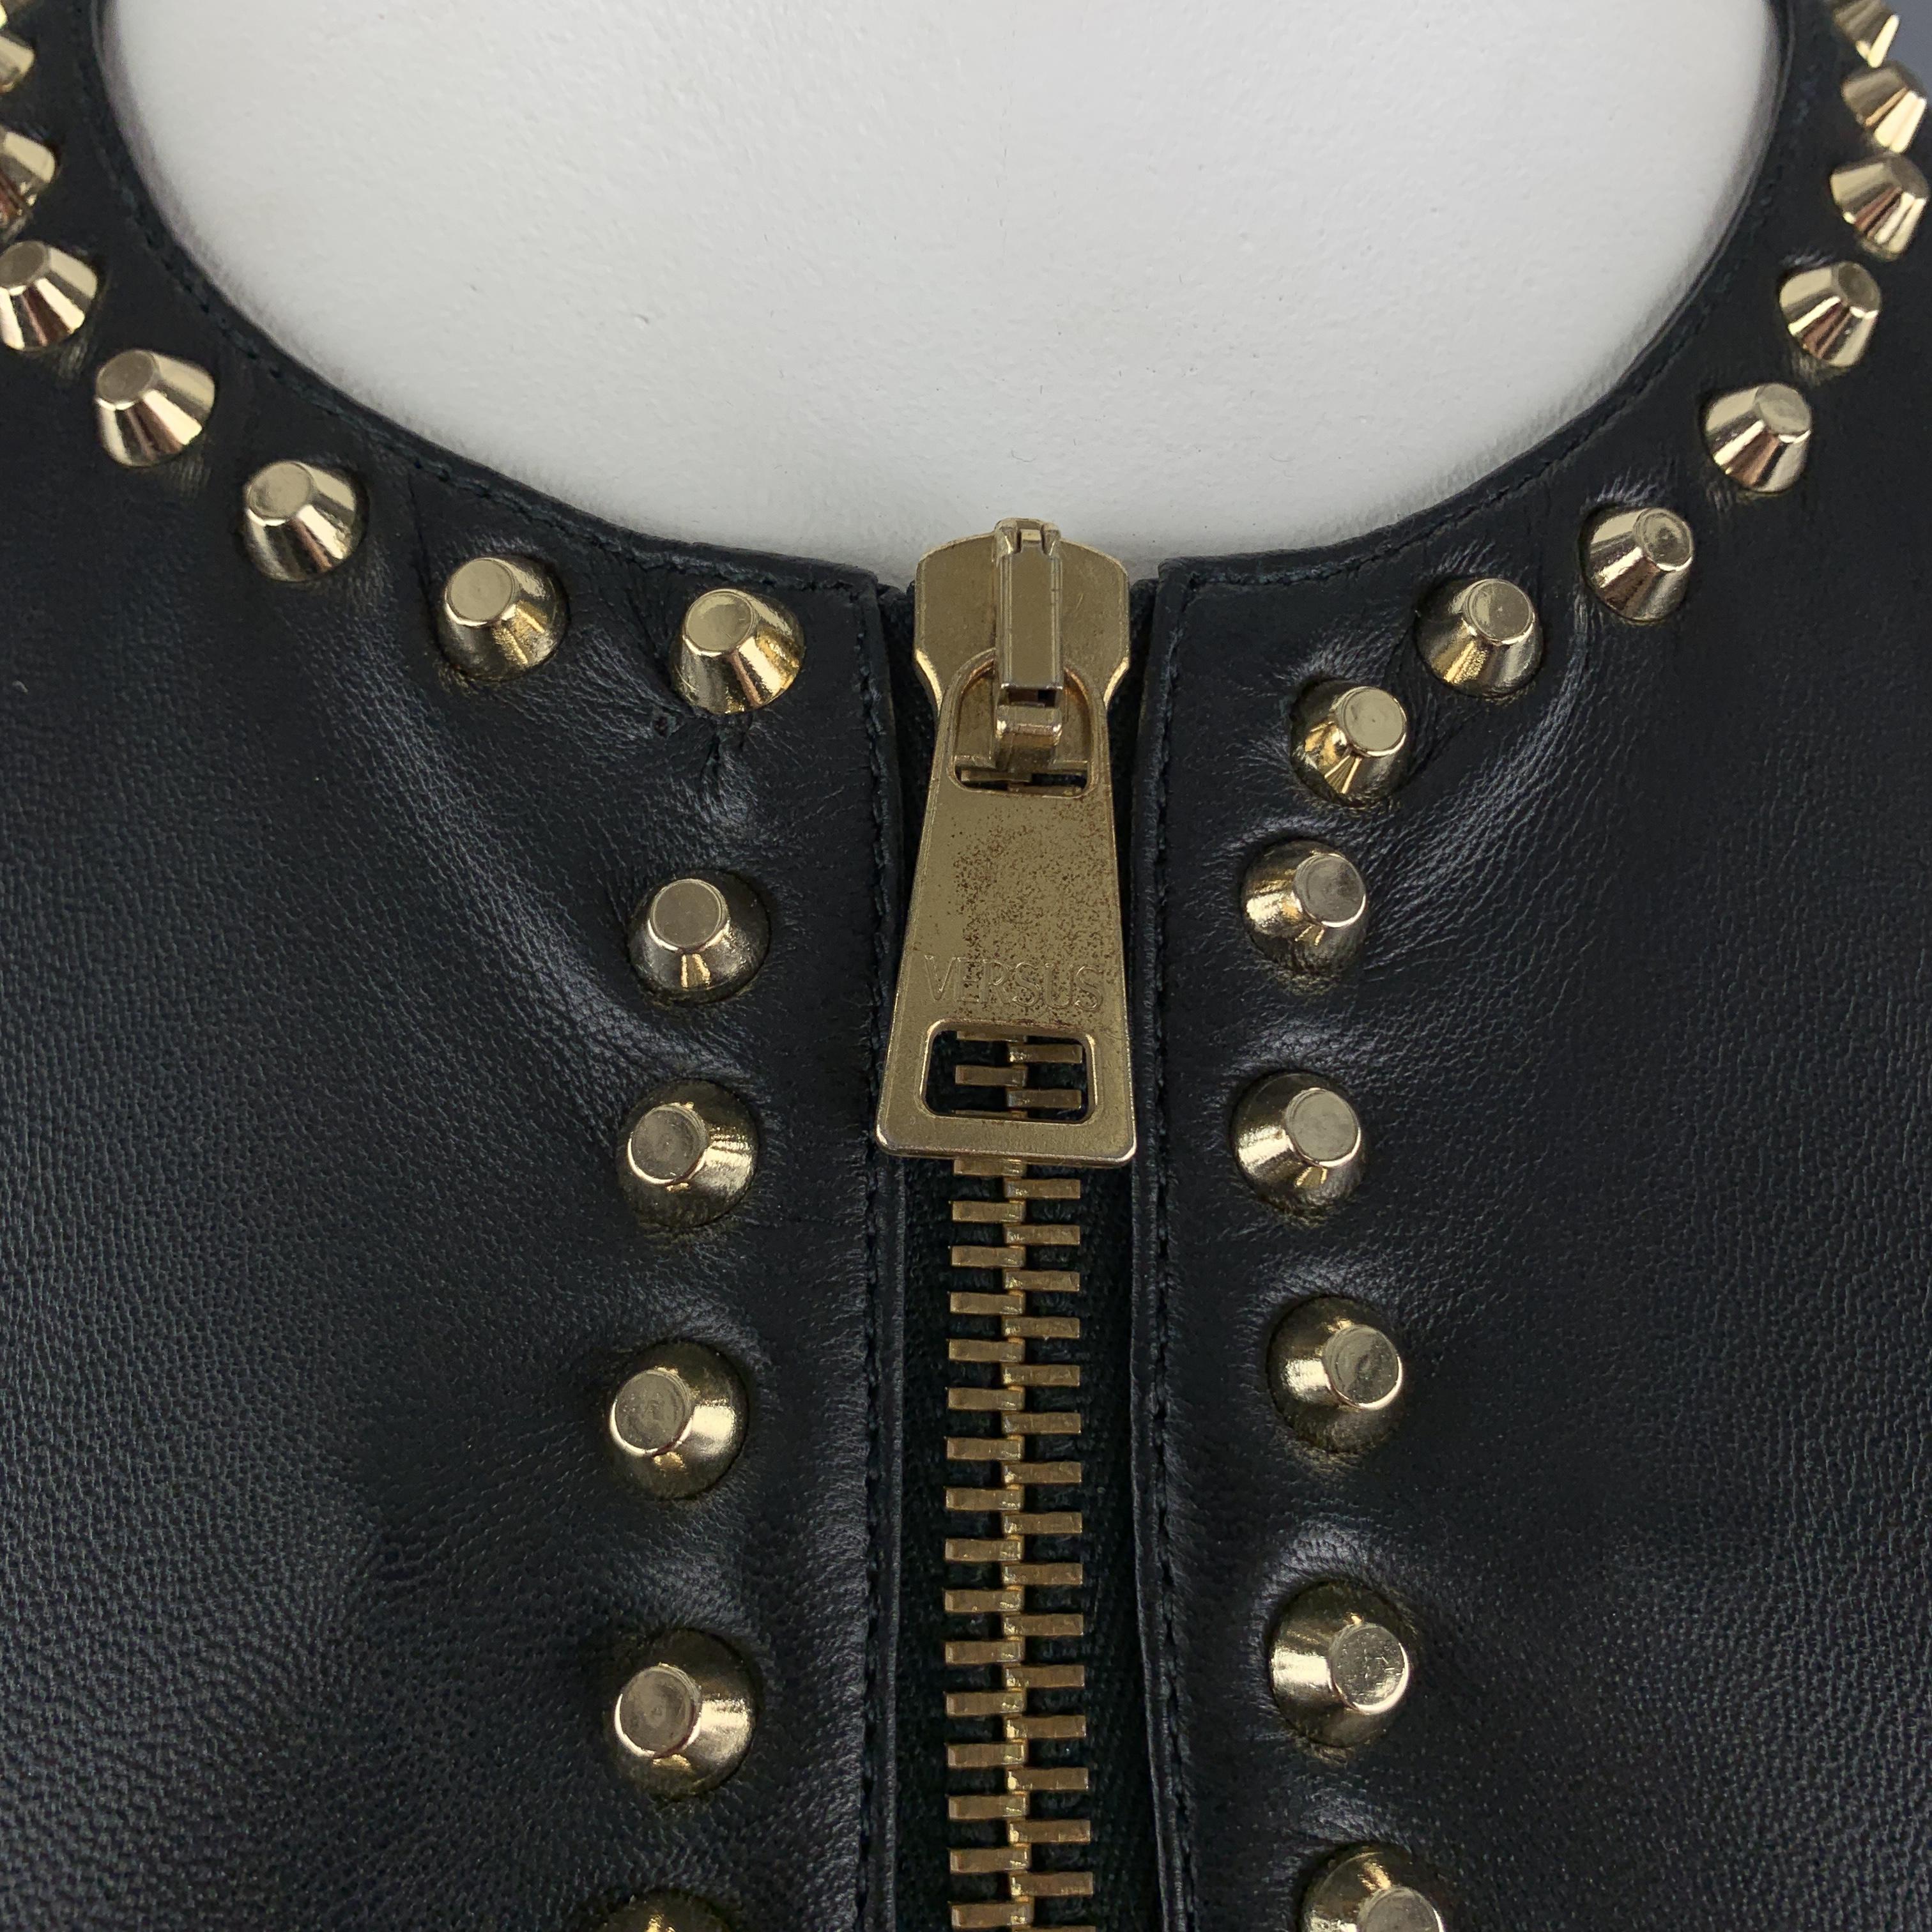 black and gold studded dress